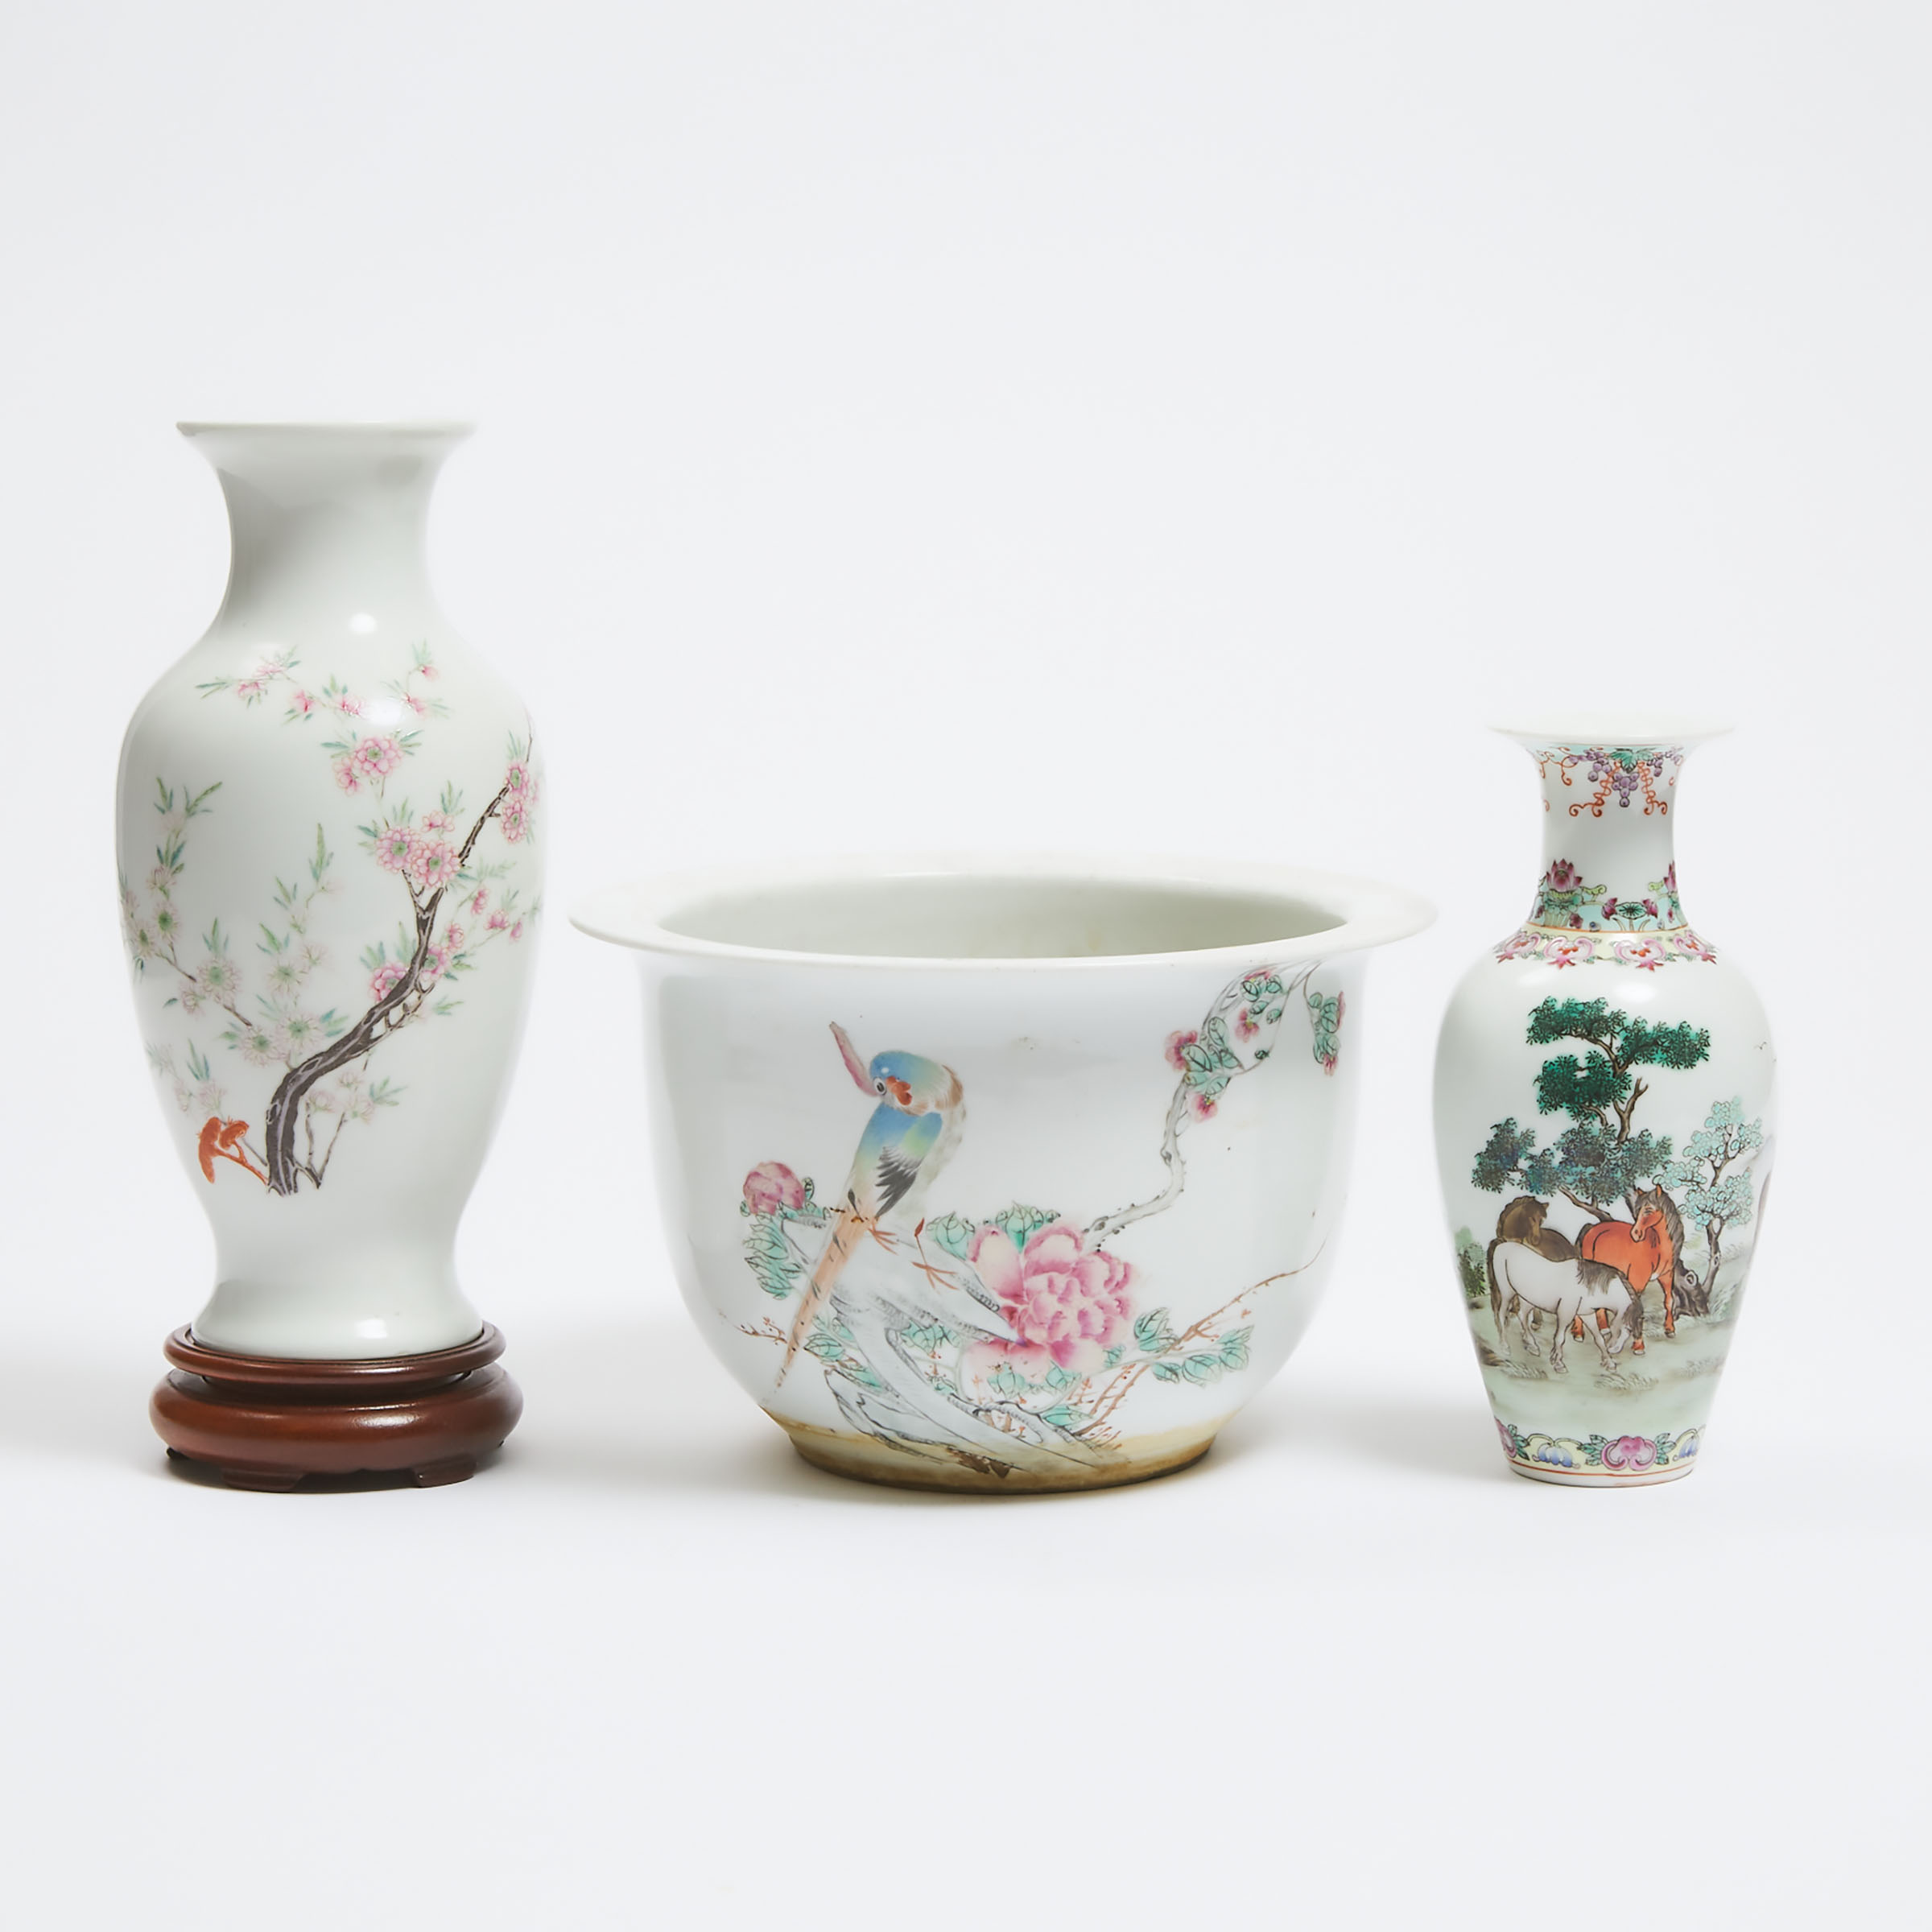 A Group of Three Famille Rose Wares, 19th Century and Later